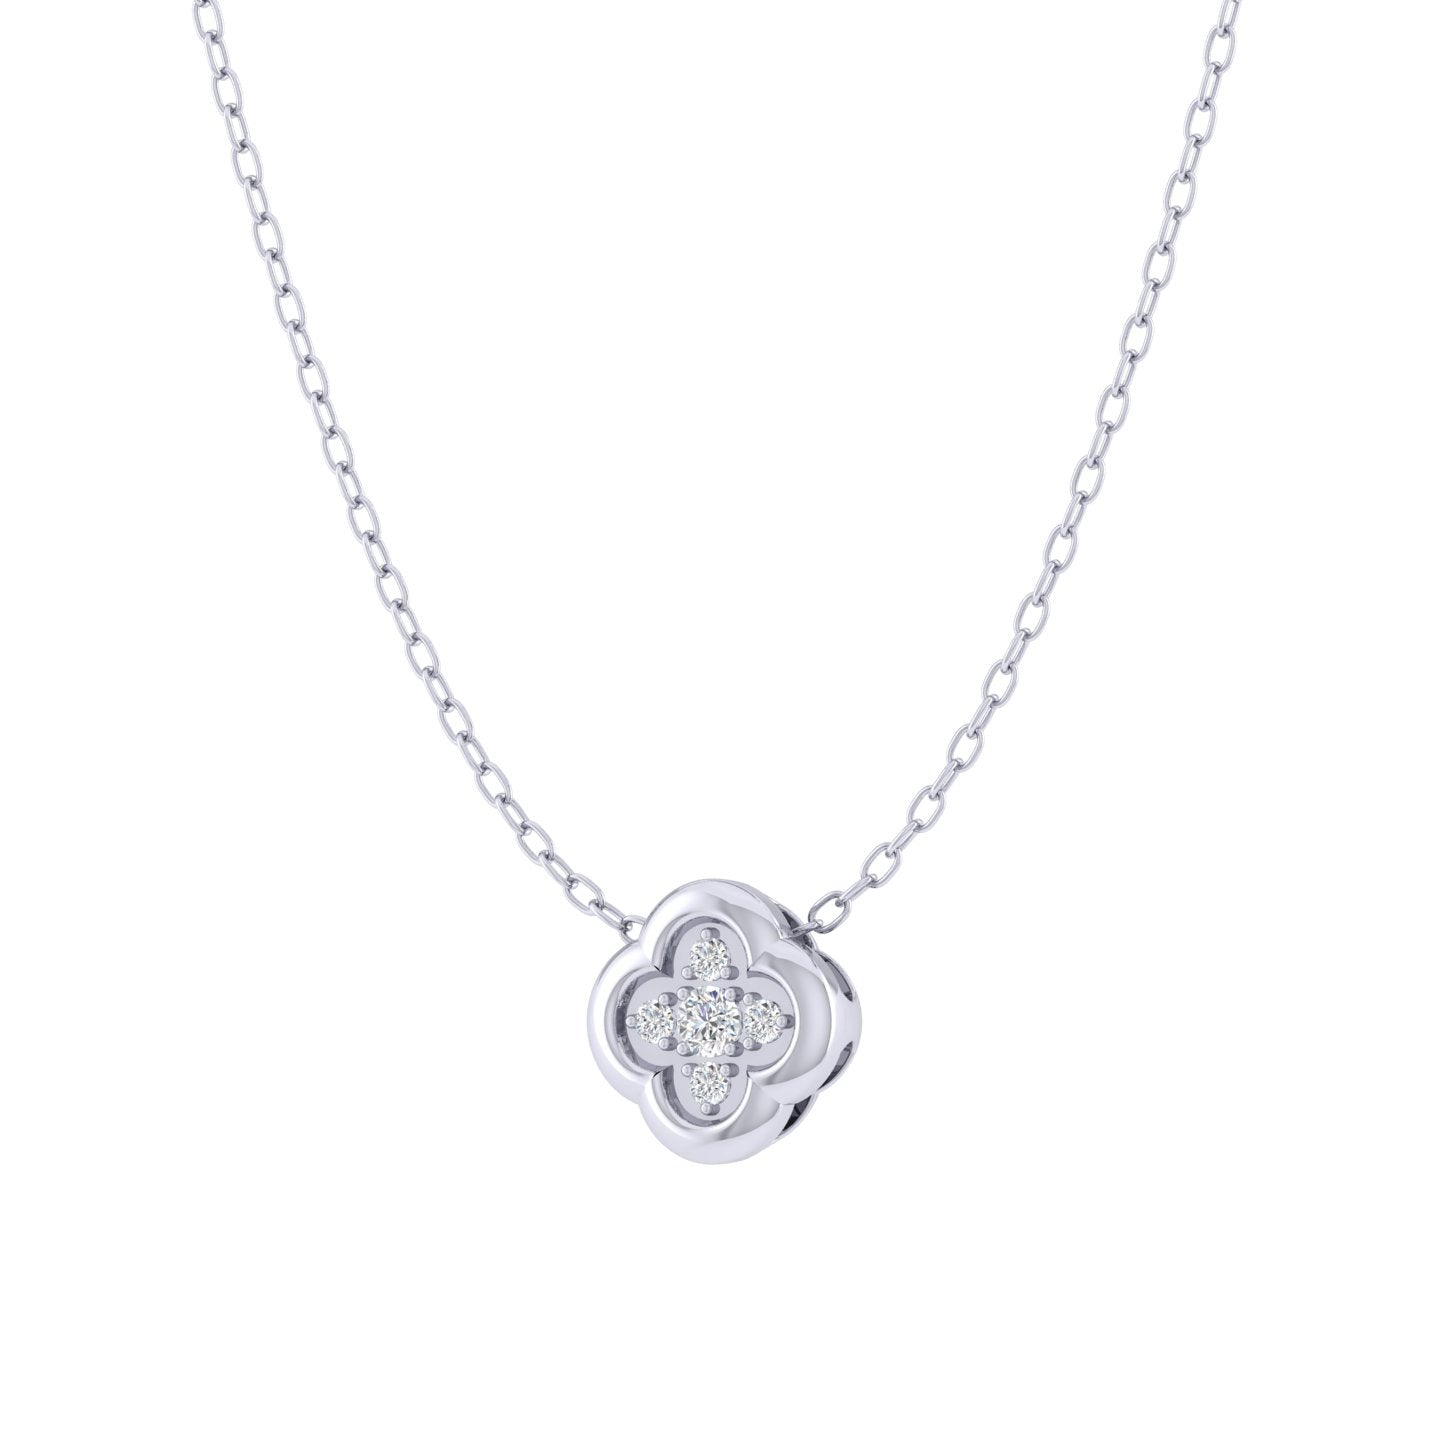 Clover 1/20 Cttw Natural Diamond Pendant Necklace set in 925 Sterling Silver fine jewelry